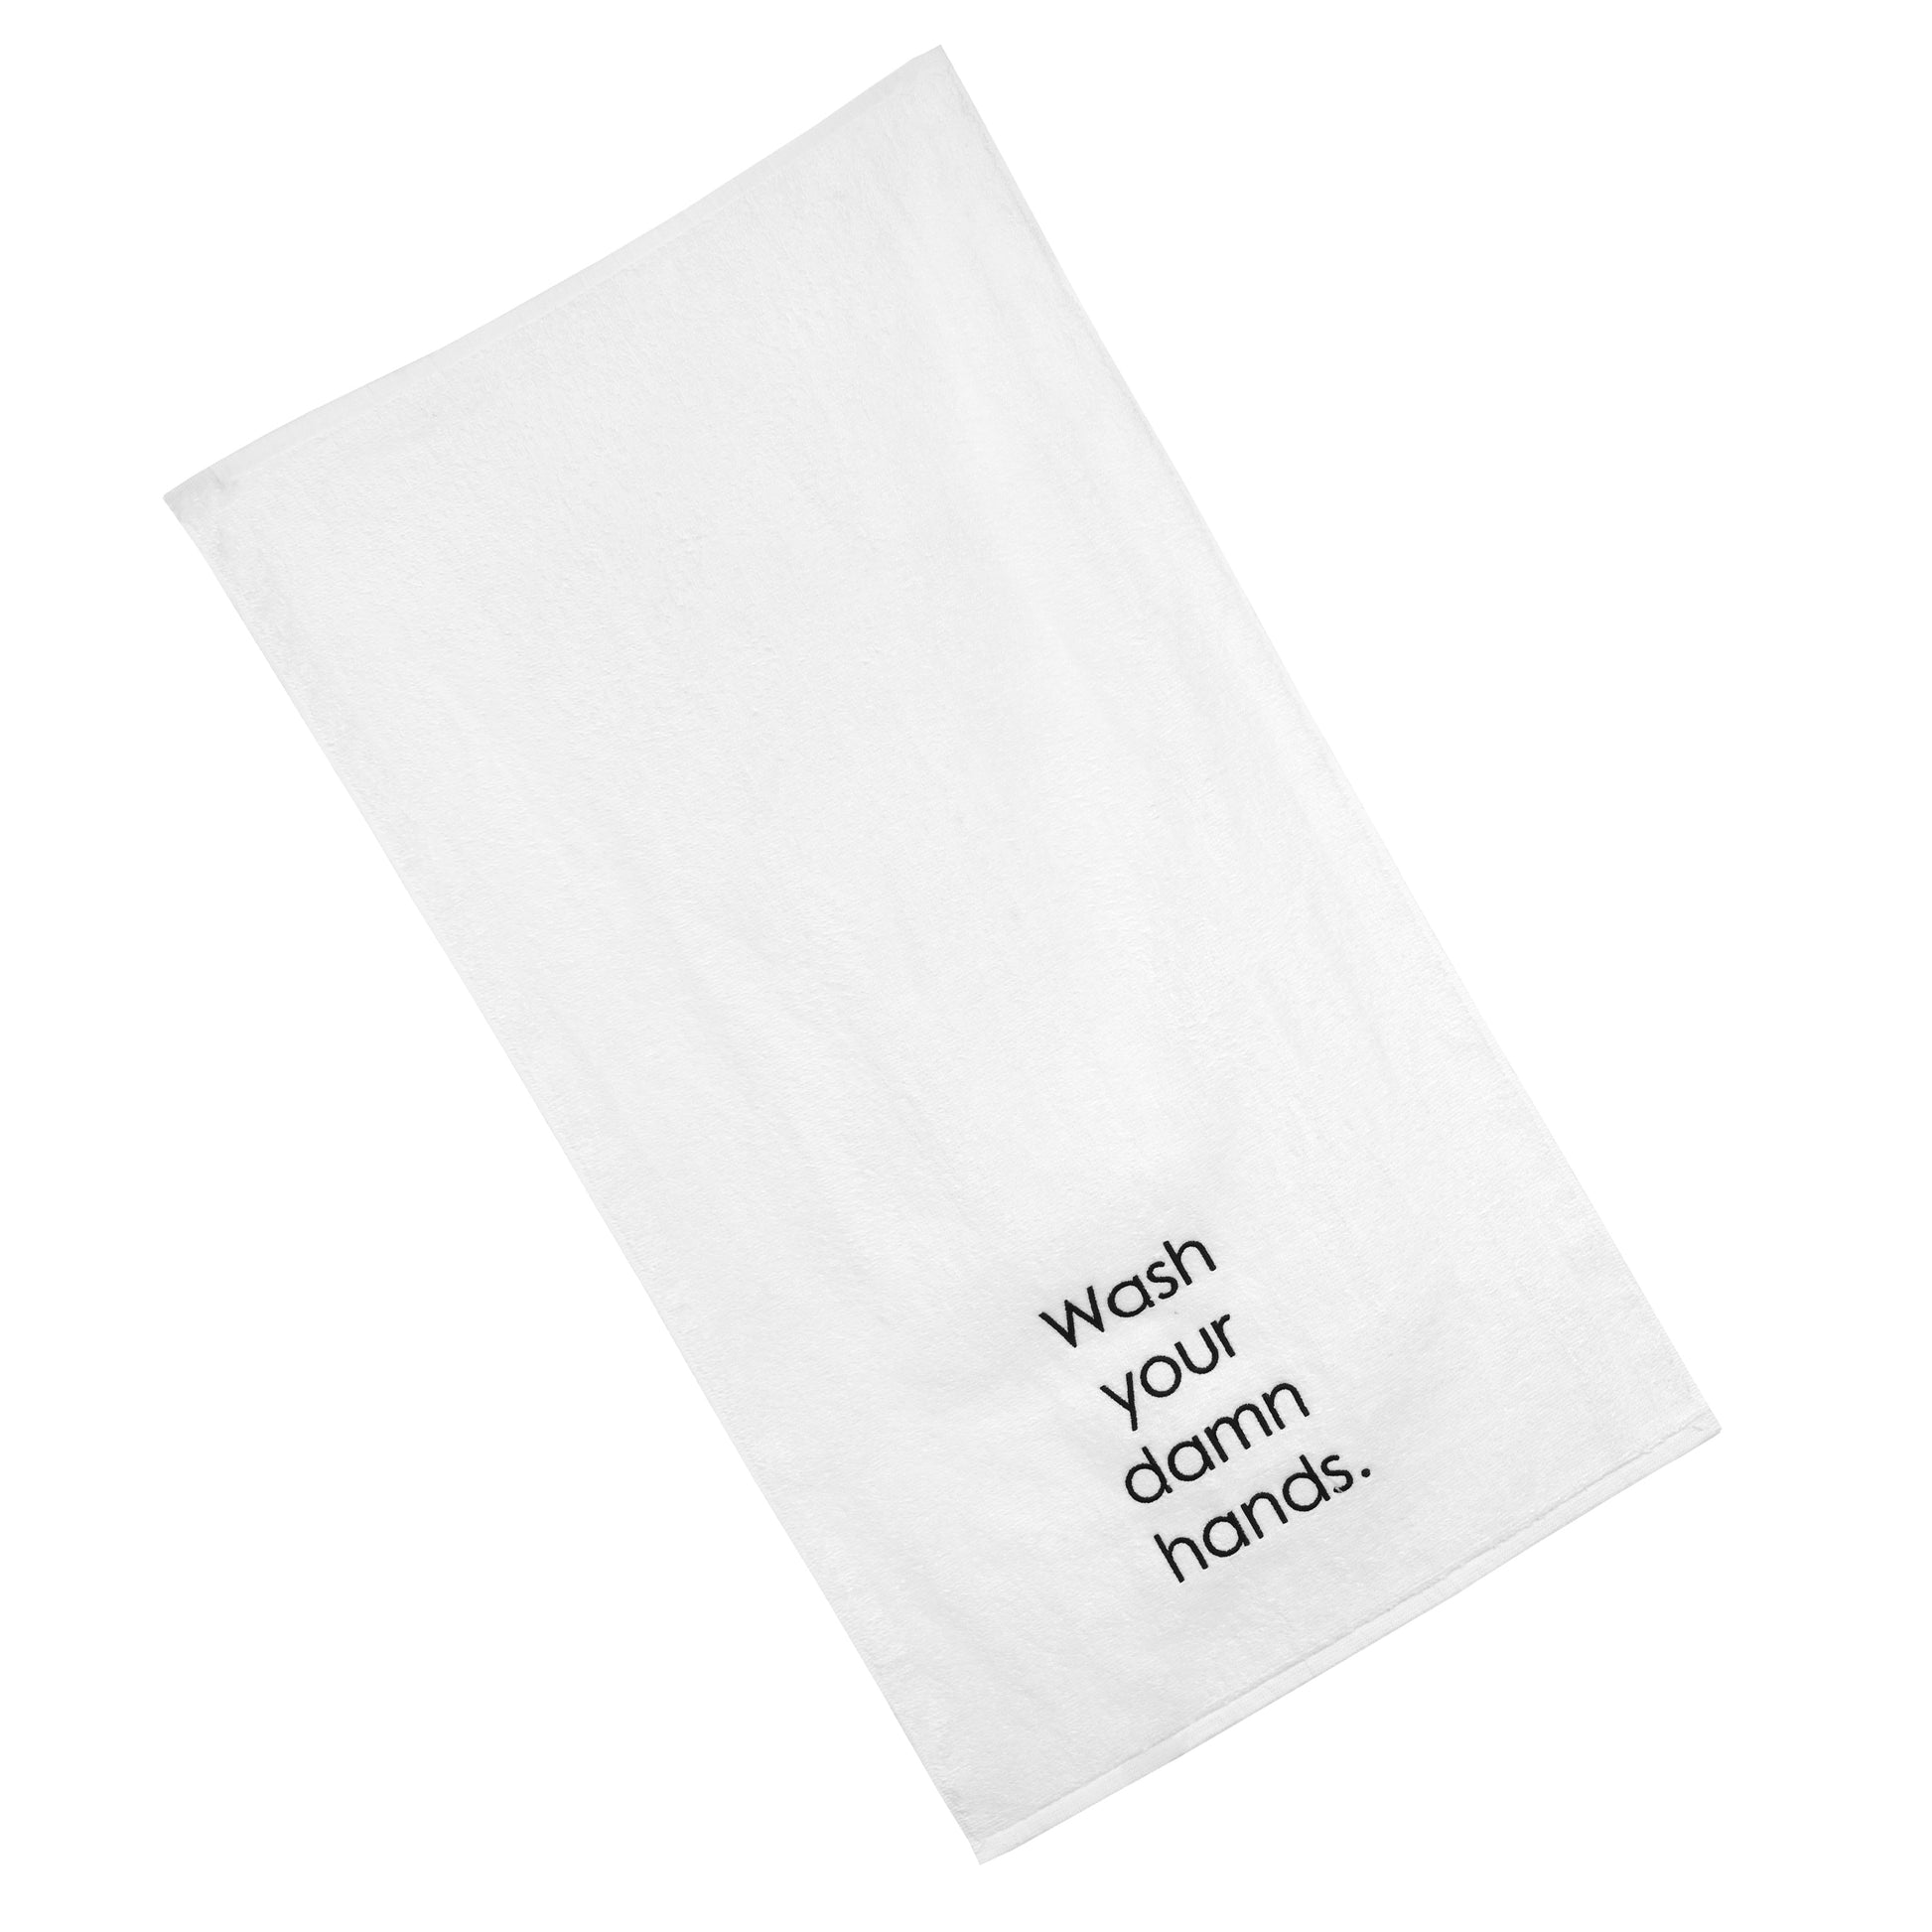 Mill & Thread 2pc Embroidered Hand Towel - Wash It, Wash It Real Good White